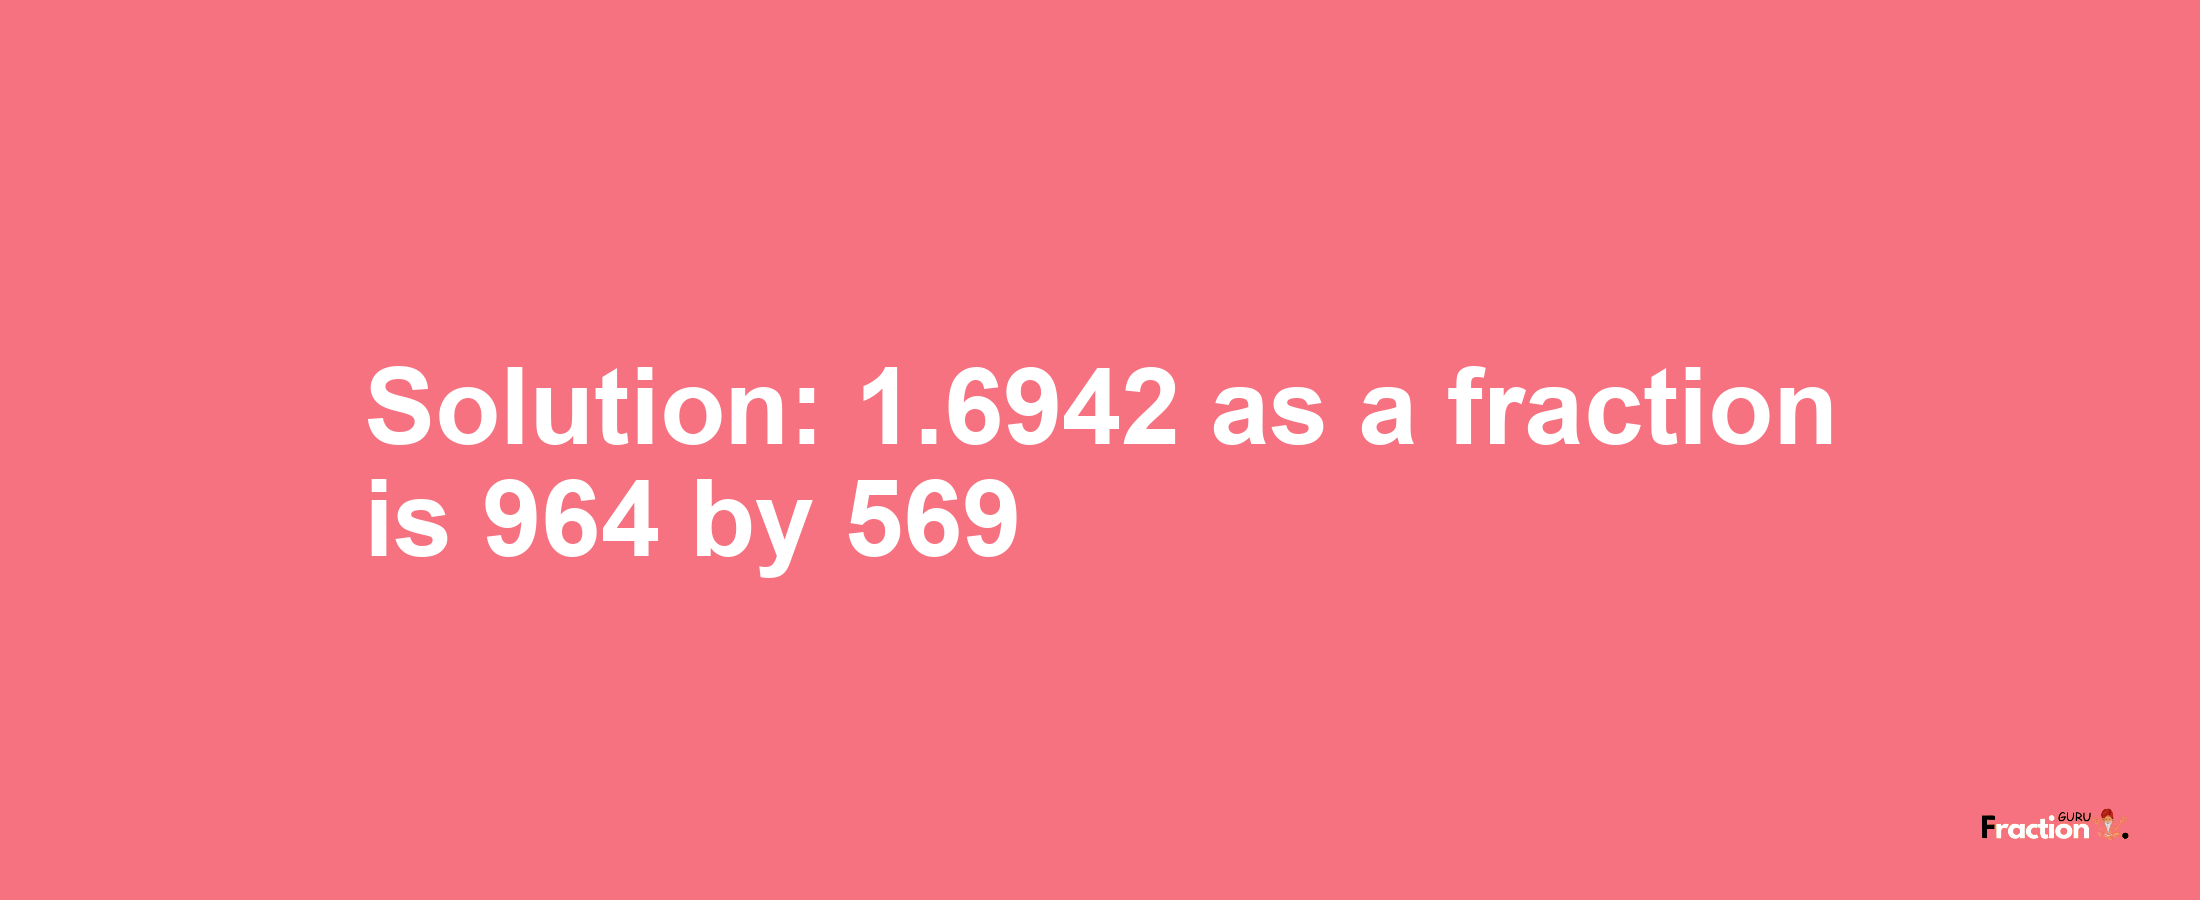 Solution:1.6942 as a fraction is 964/569